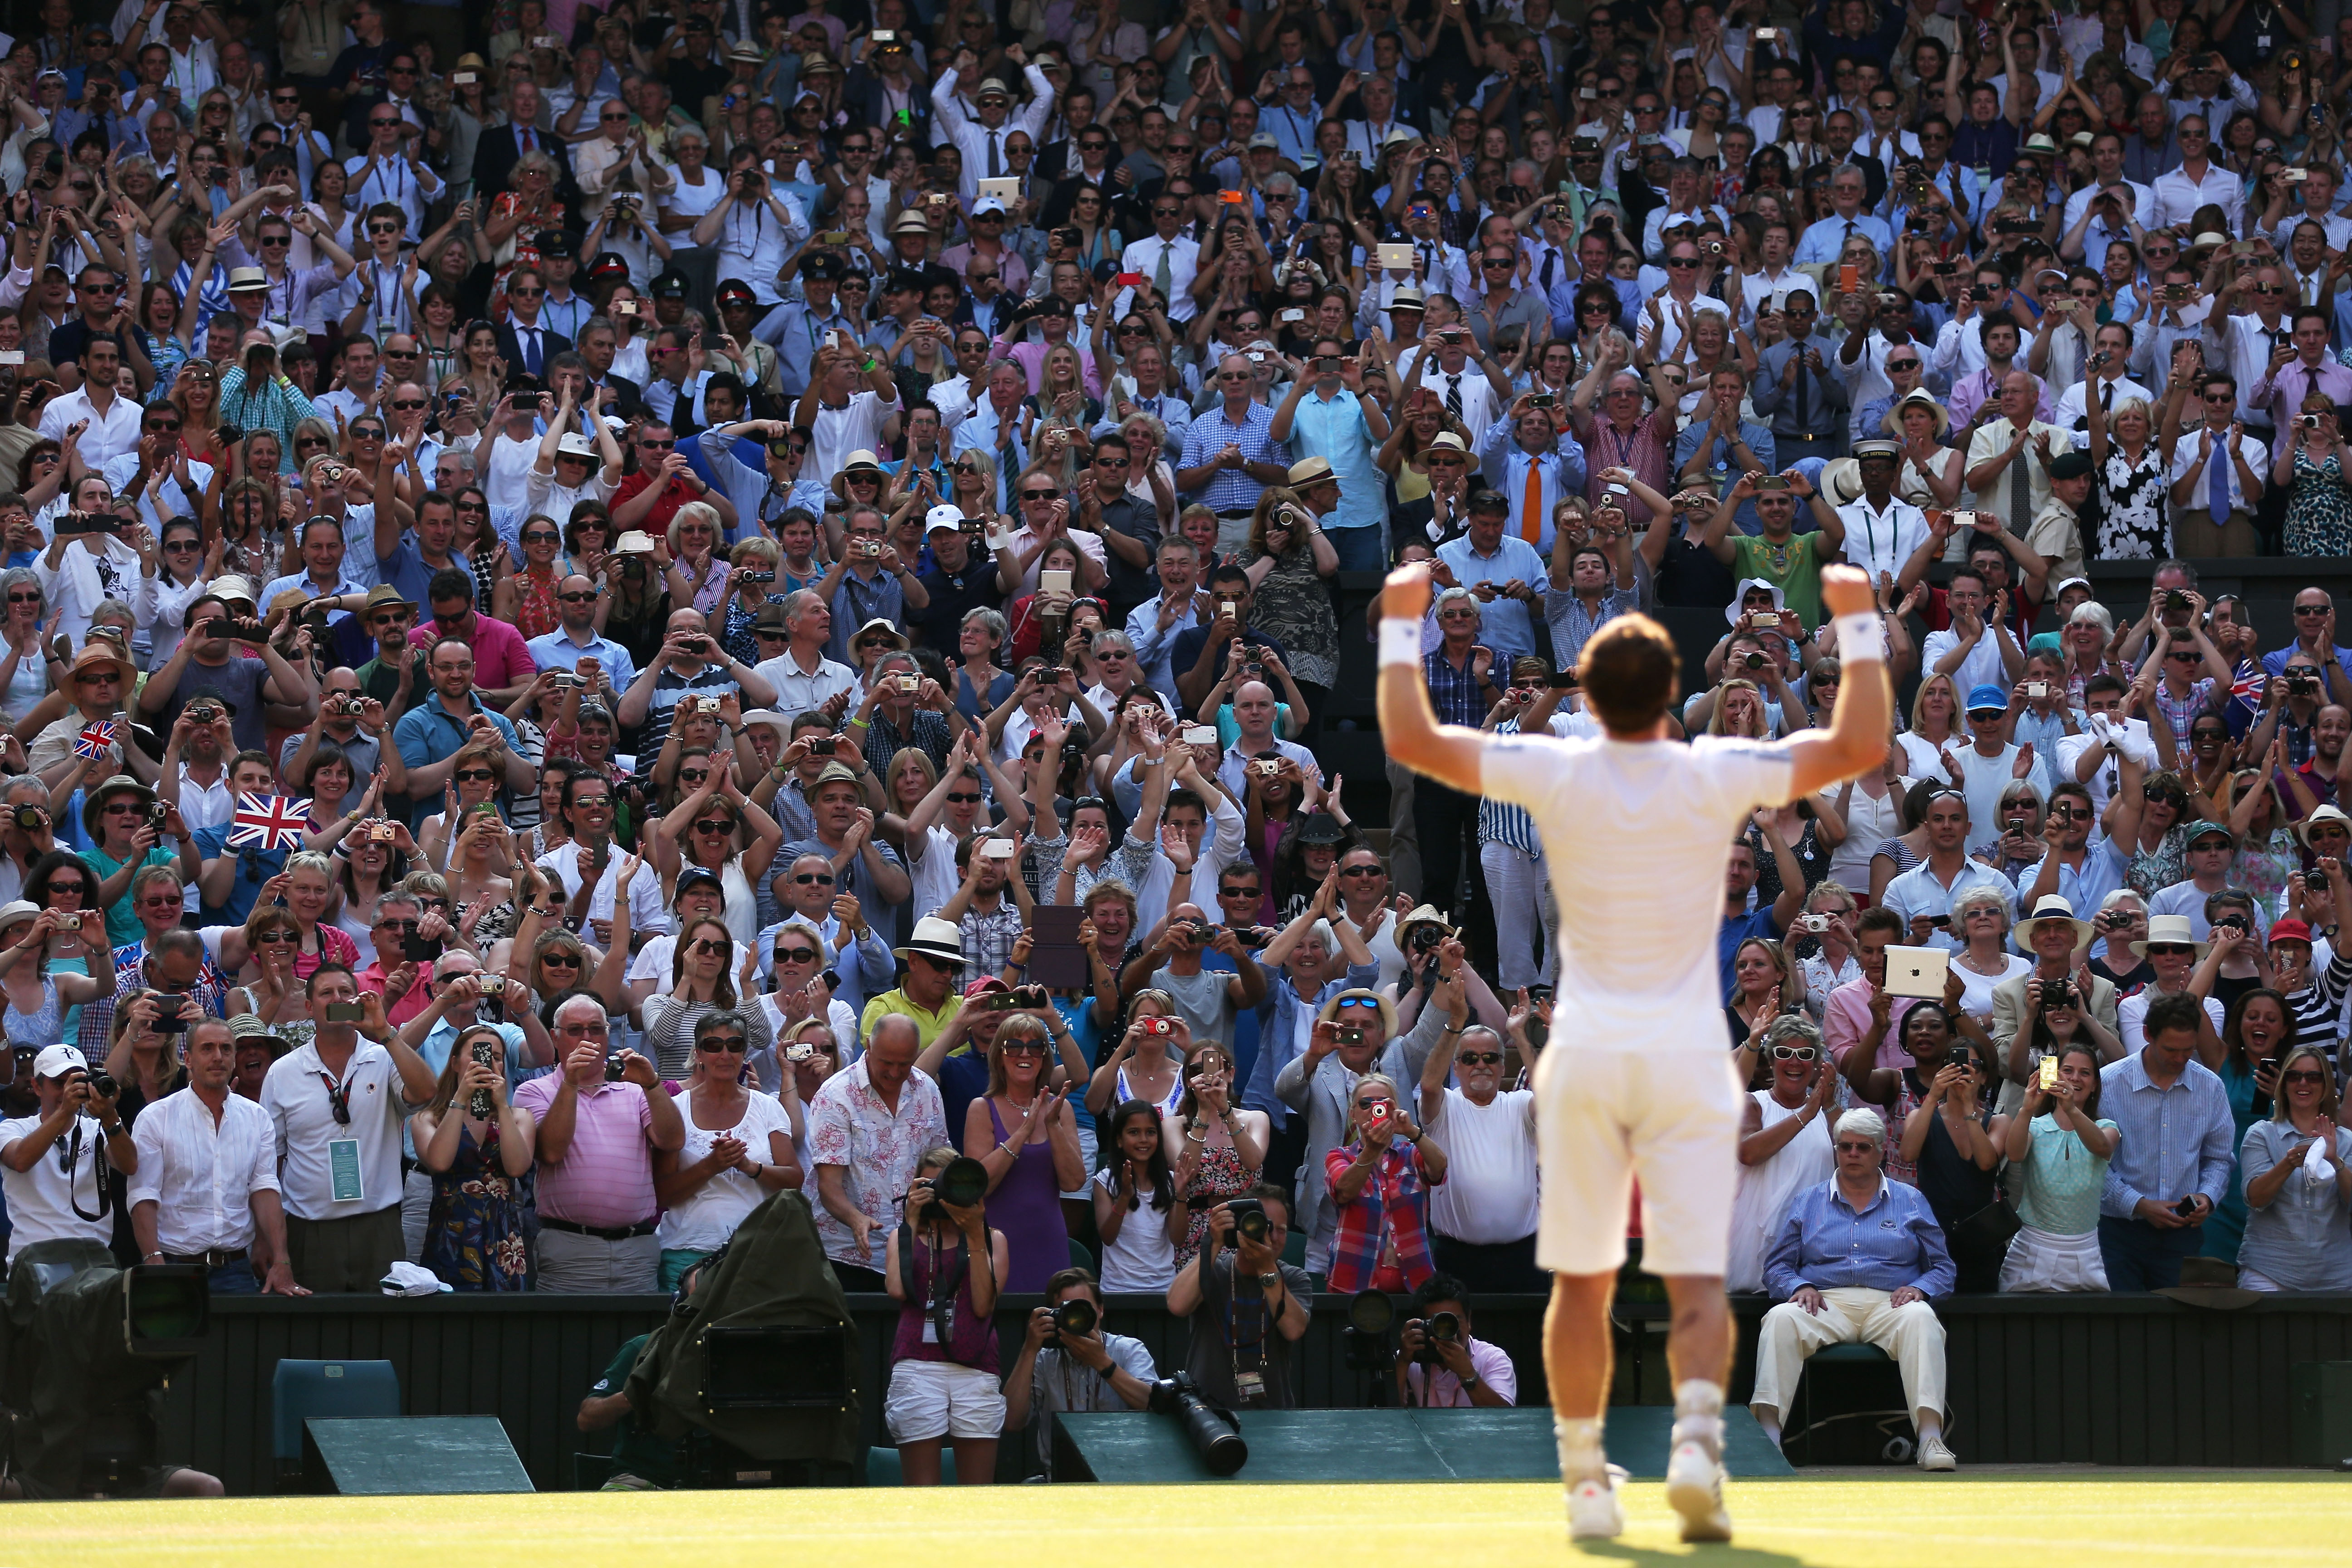 Andy Murray celebrates becoming Wimbledon champion in 2013. He was the first British winner since Fred Perry in 1936.